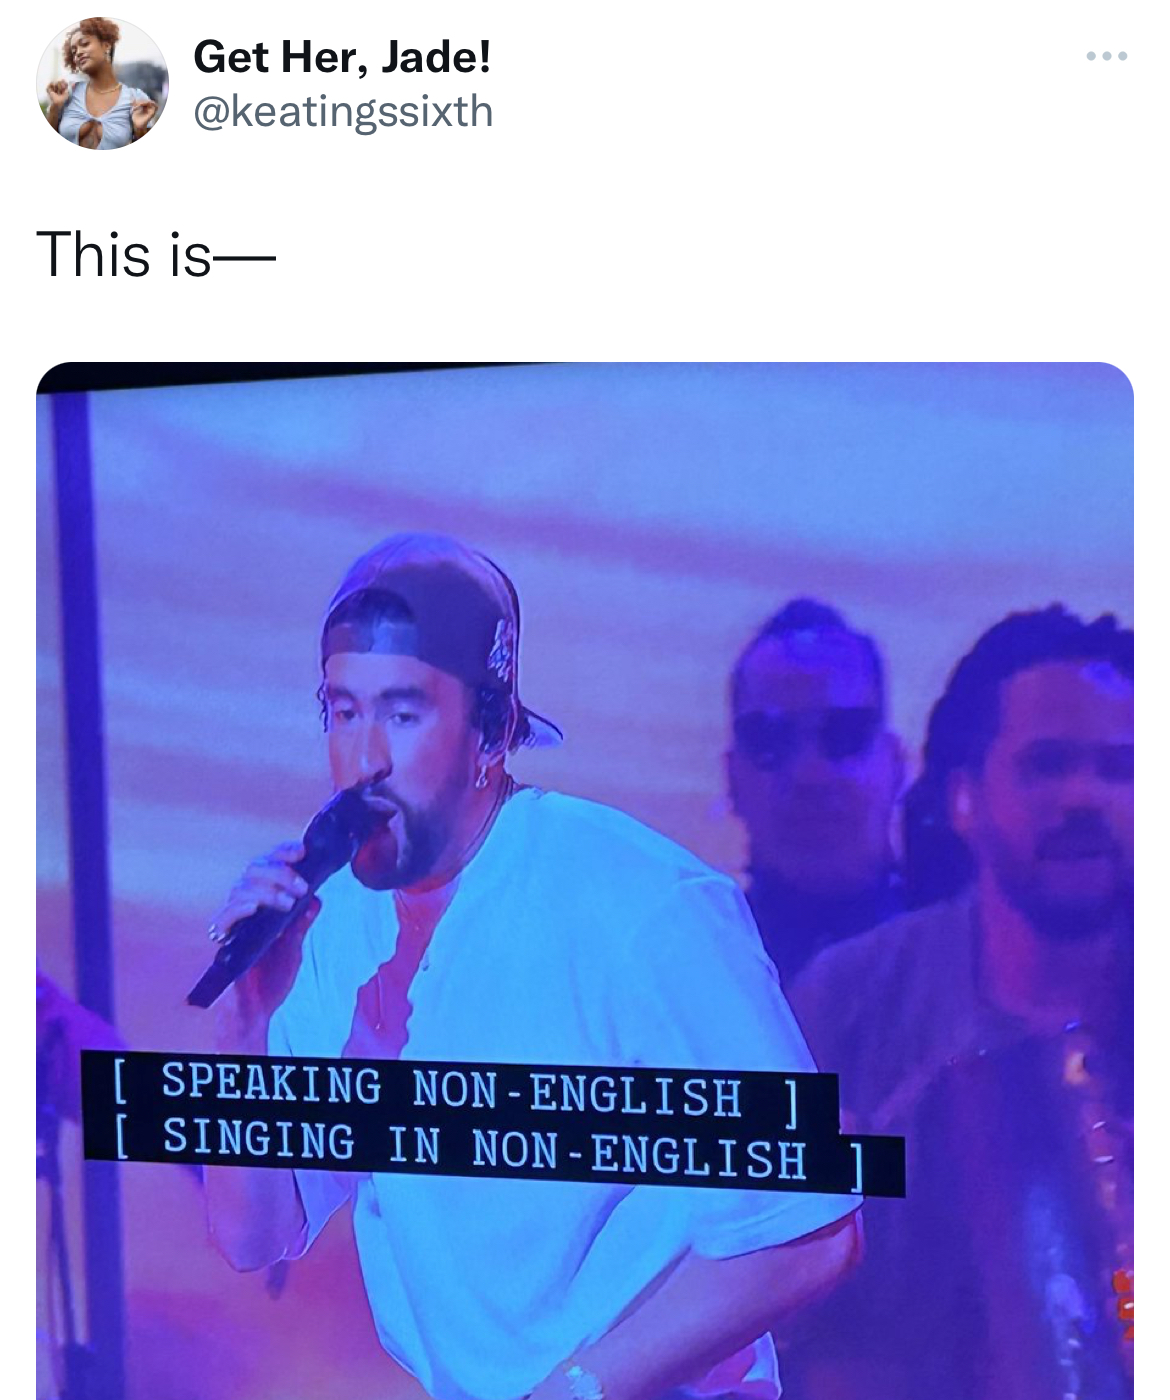 savage and absurd tweets - fun - Get Her, Jade! This is Speaking NonEnglish Singing In NonEnglish